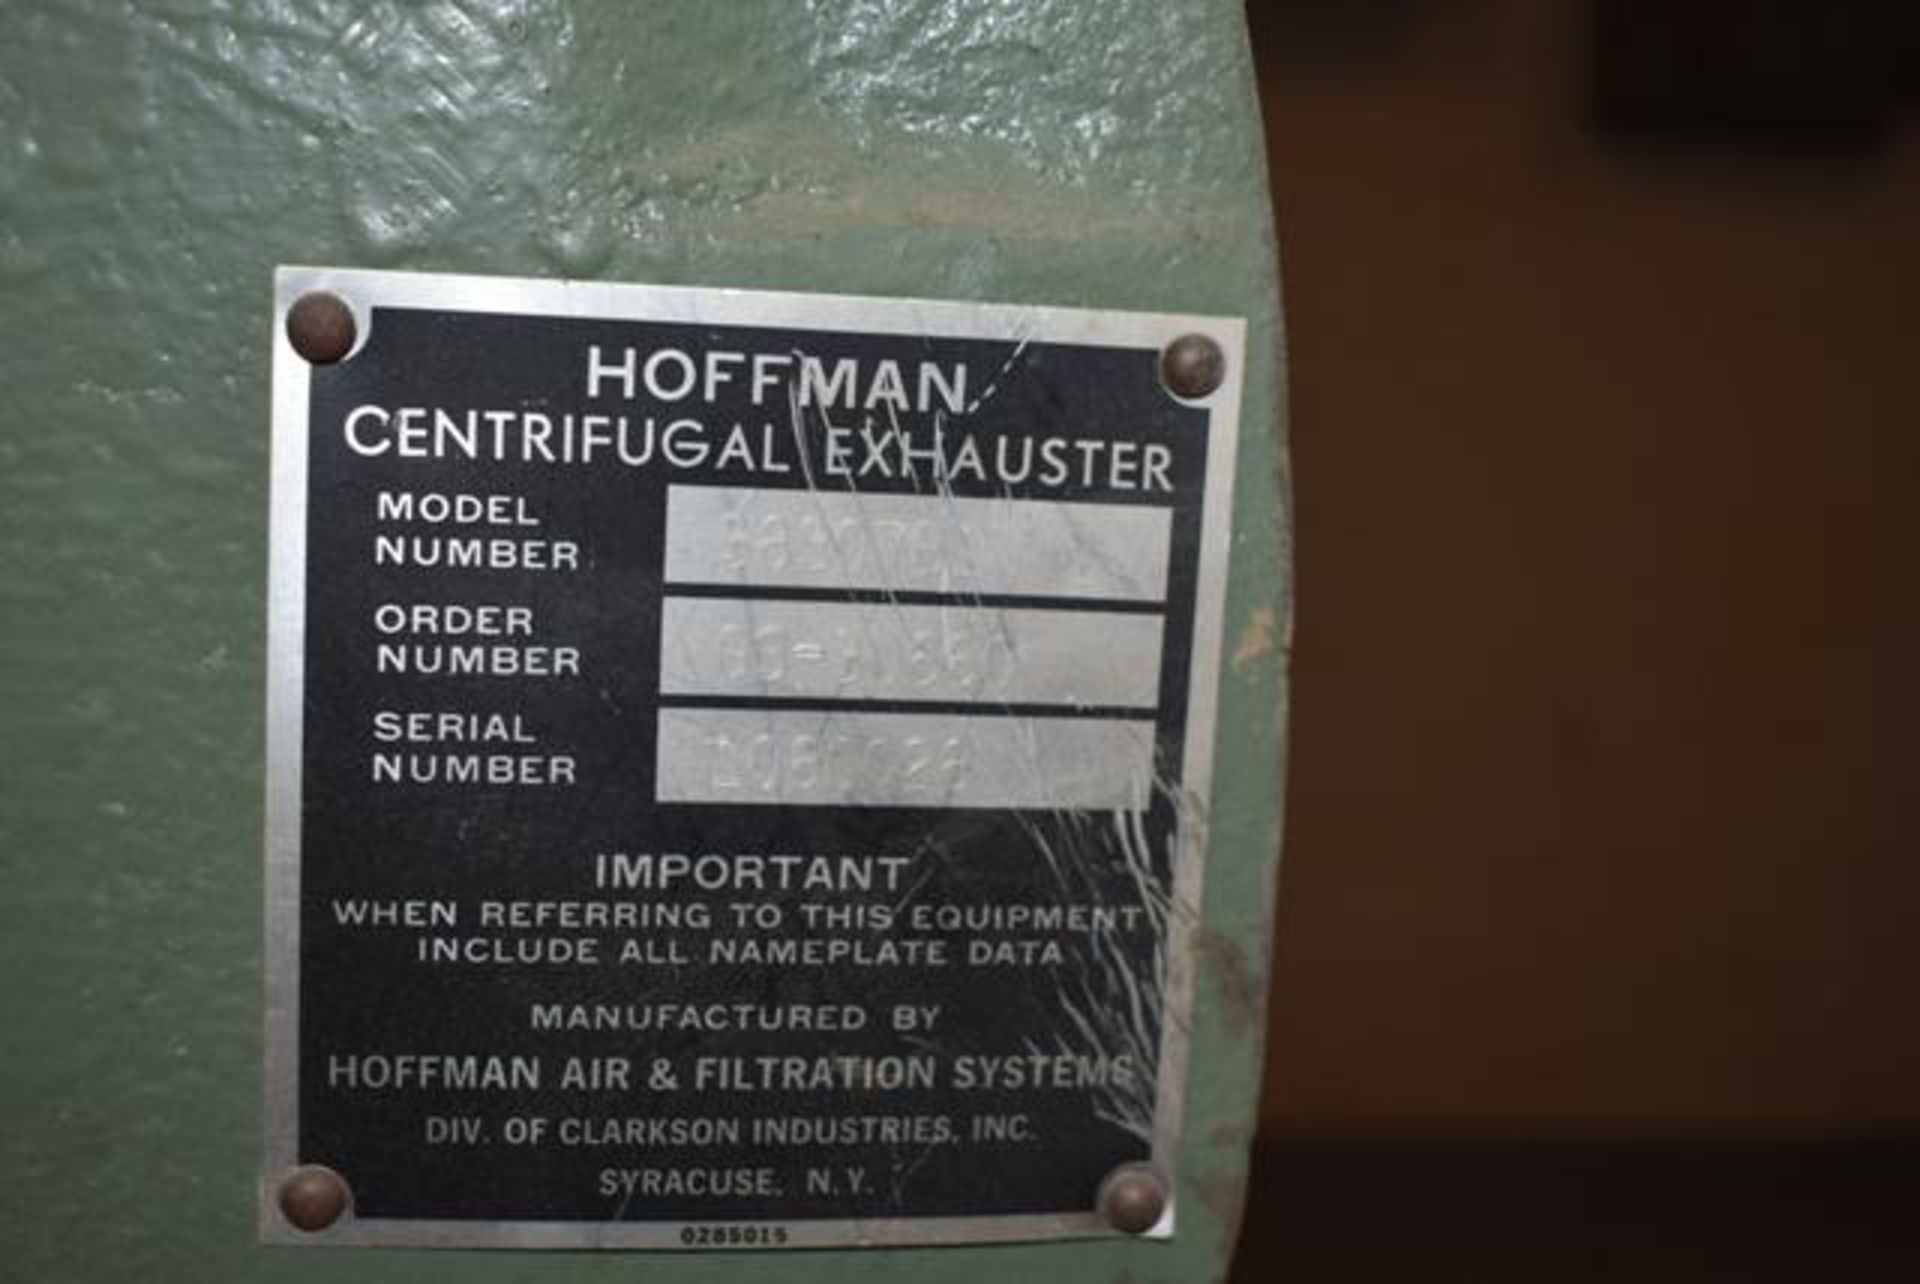 Hoffman Model #38307B1 Centrifugal Exhauster - Image 3 of 3